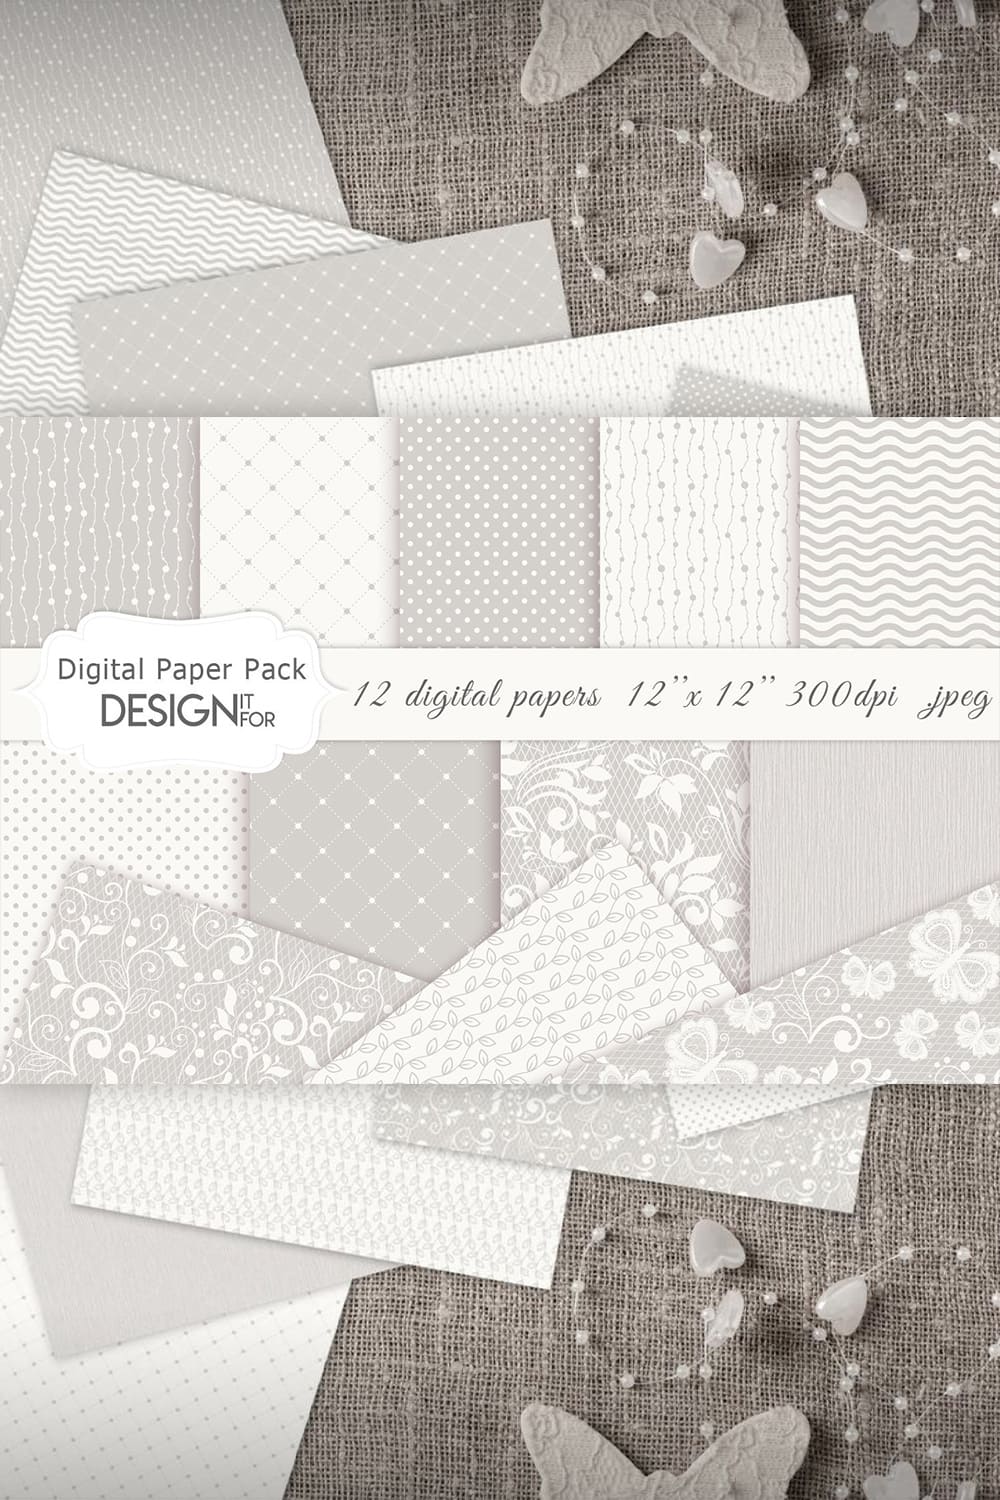 Wedding Digital Paper Pack, Wedding Patterns, Lace Papers - Pinterest.